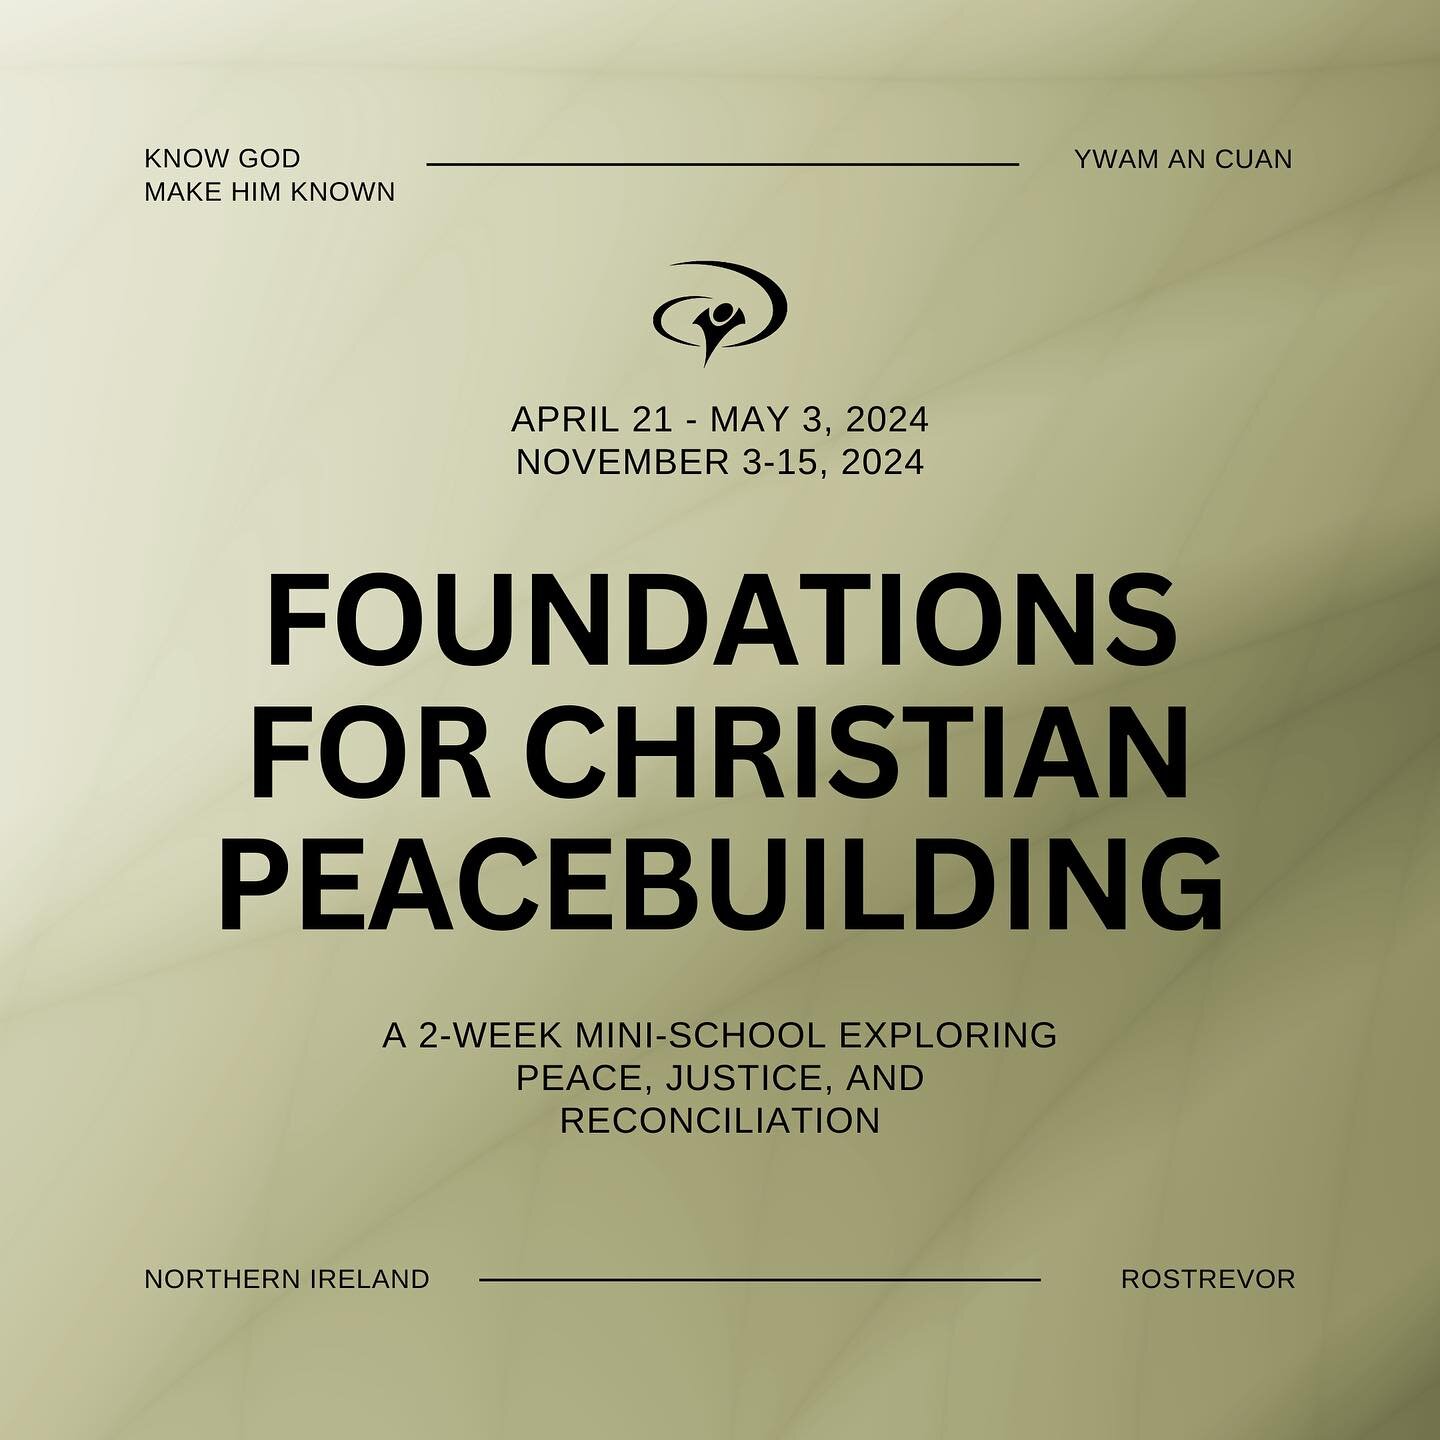 We are very excited to launch our new 2-week mini-school exploring peace, justice, and reconciliation. Join us either April 21-May 3, 2024 or November 3-15, 2024 in Northern Ireland!

The Foundations for Christian Peacebuilding school gathers people 